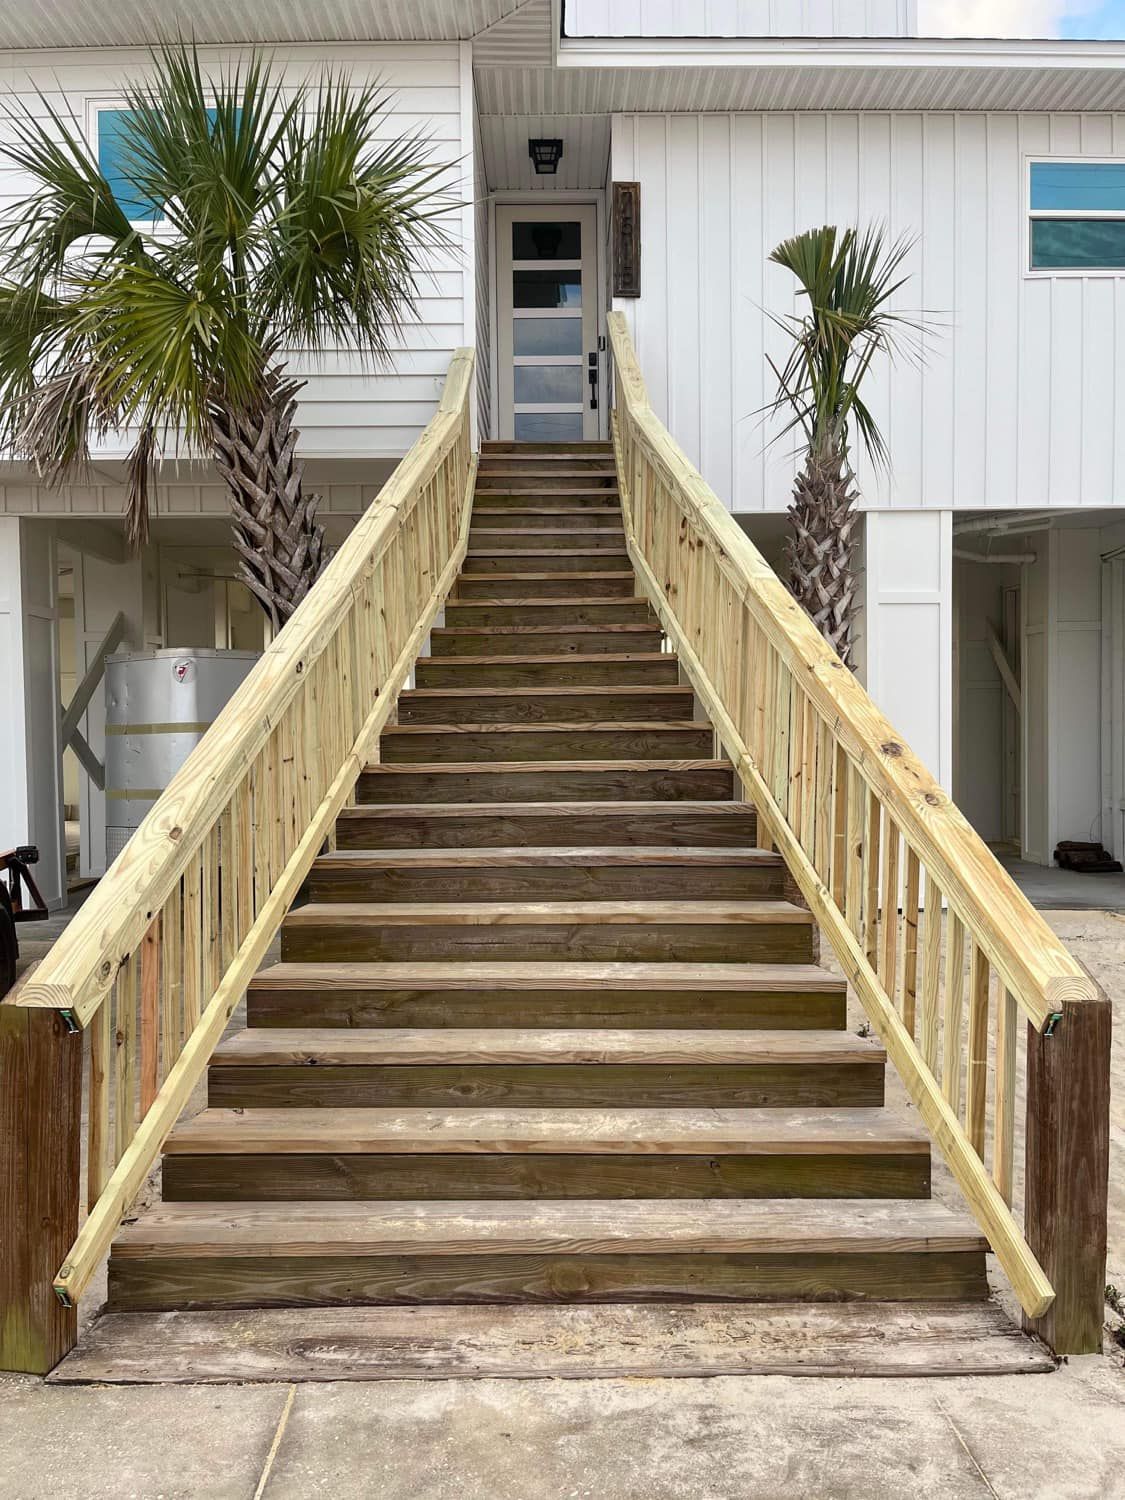 After Fixing The Stairs - Fort Walton Beach, FL - Swear Fence & Lawn Installations LLC